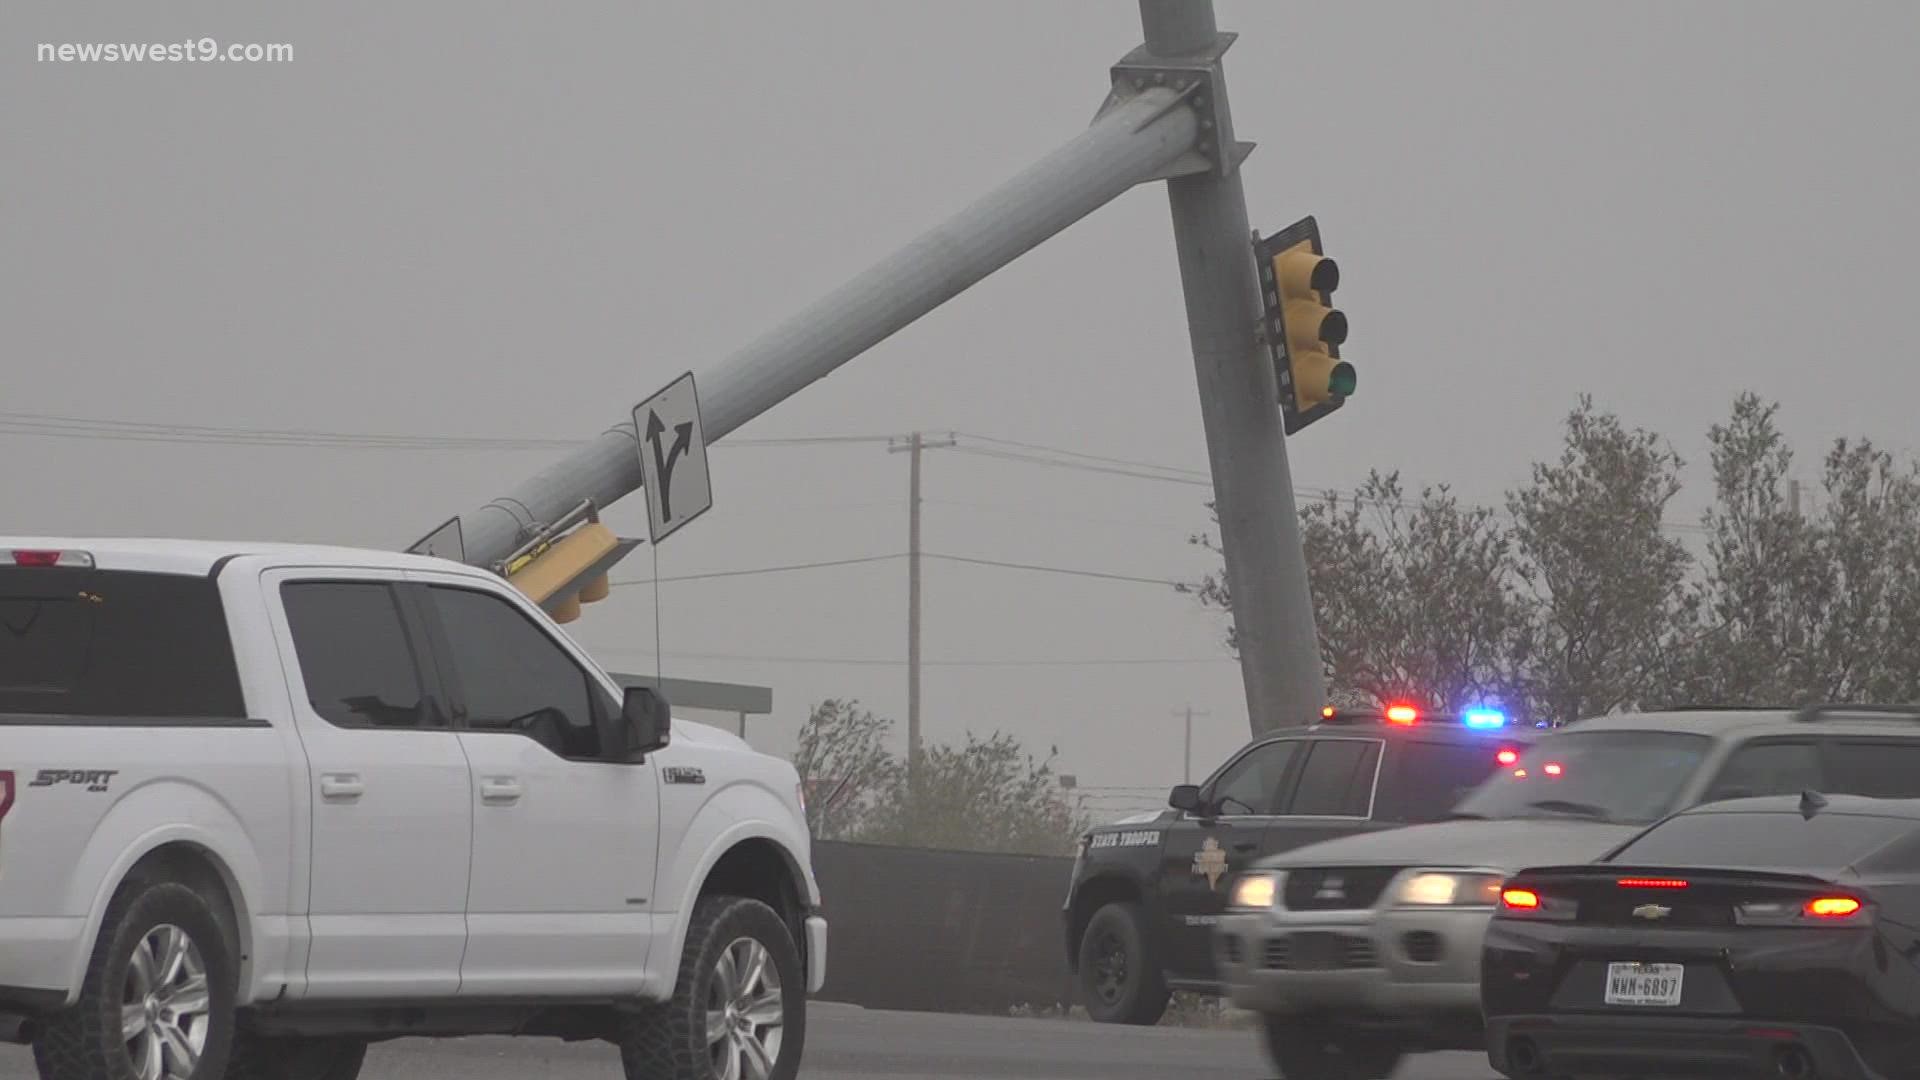 The traffic light fell down Tuesday due to high winds in the area.